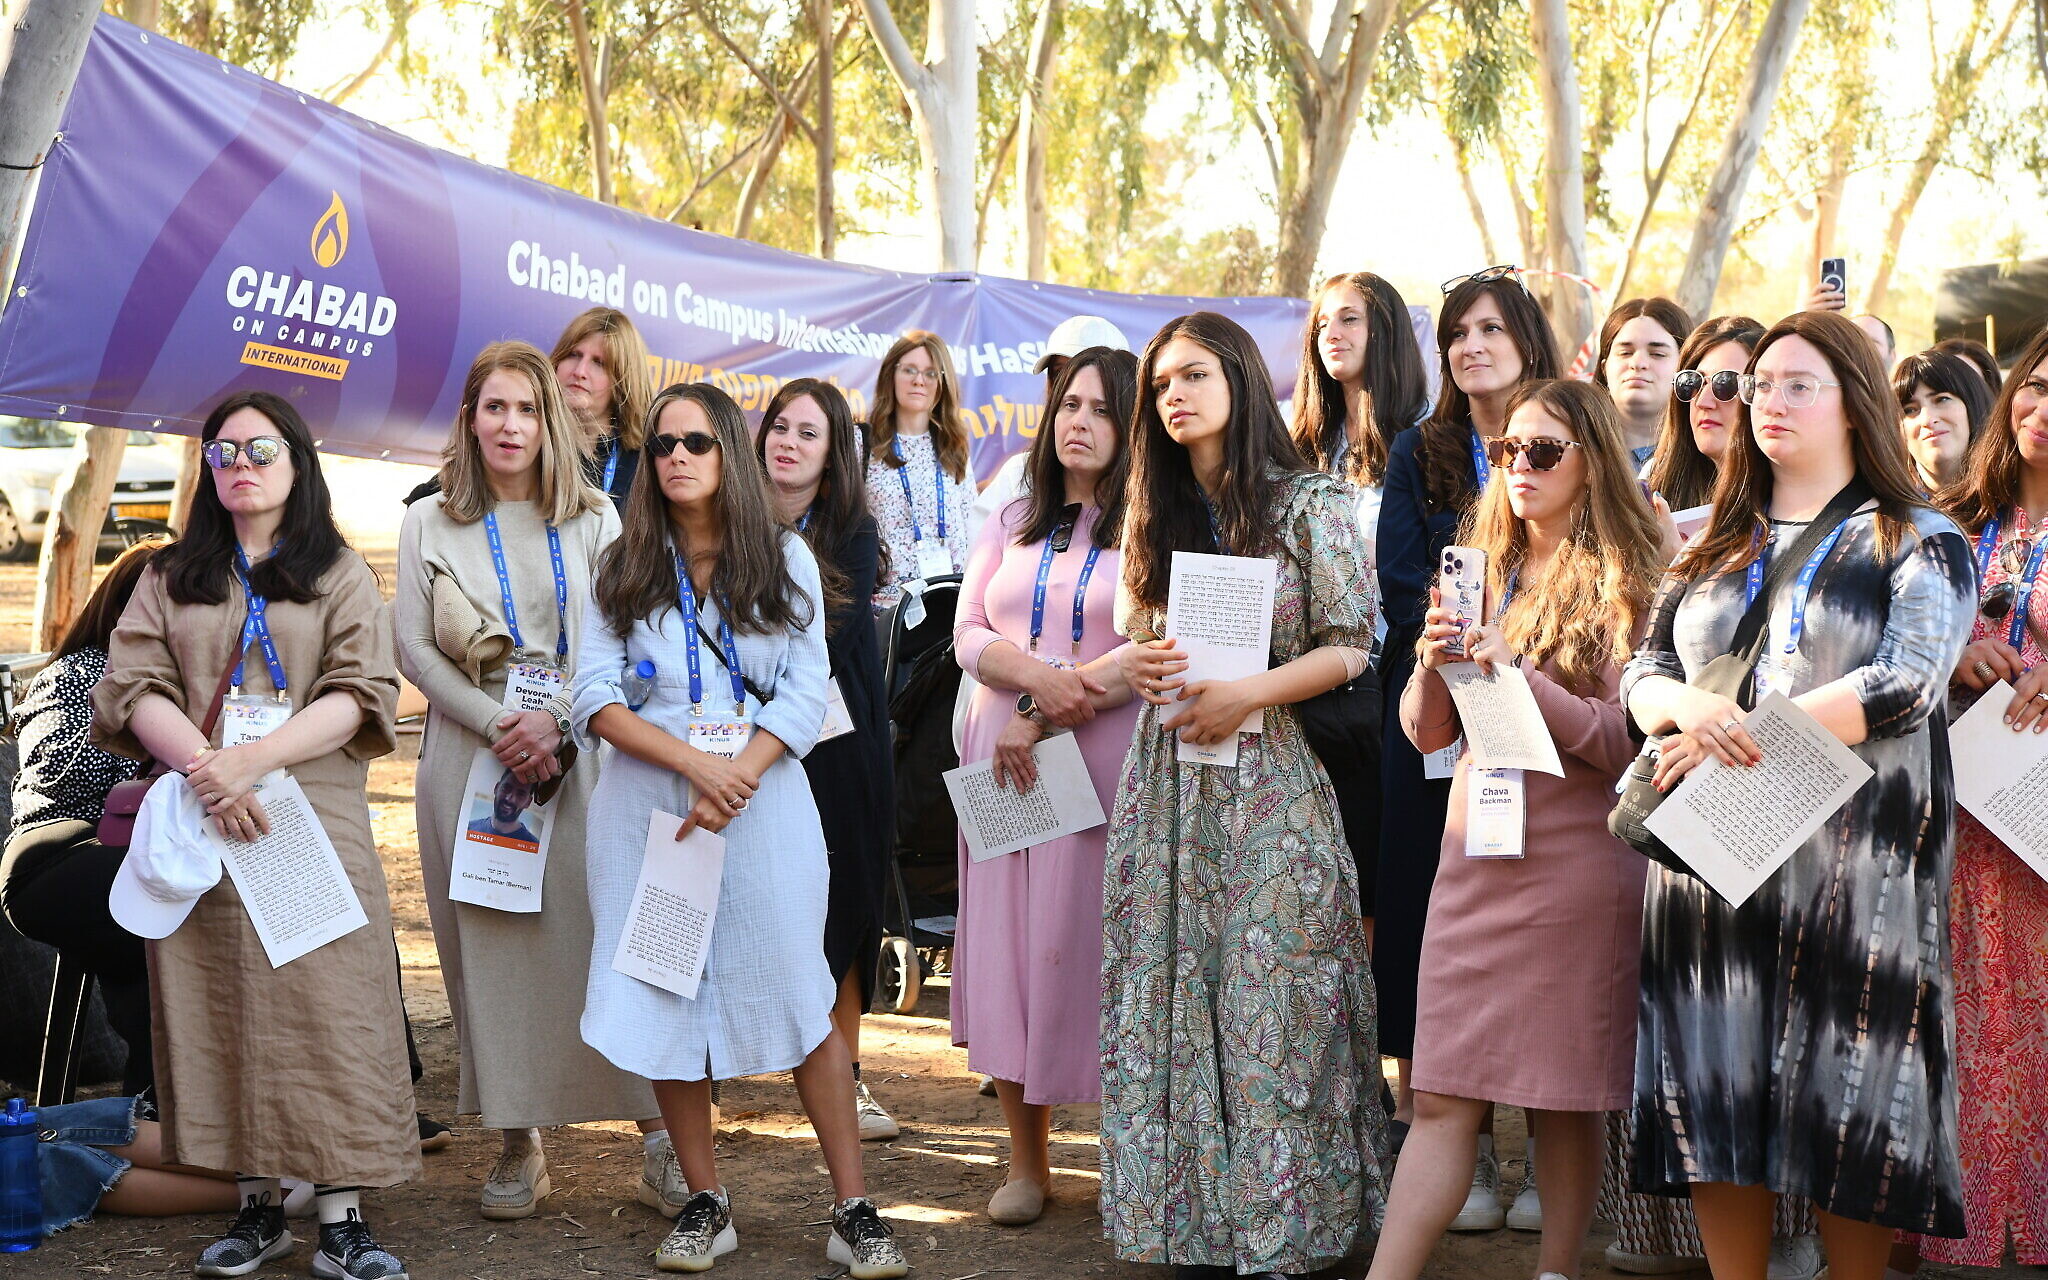 In Israel, US Chabad women campus emissaries commiserate over their ...